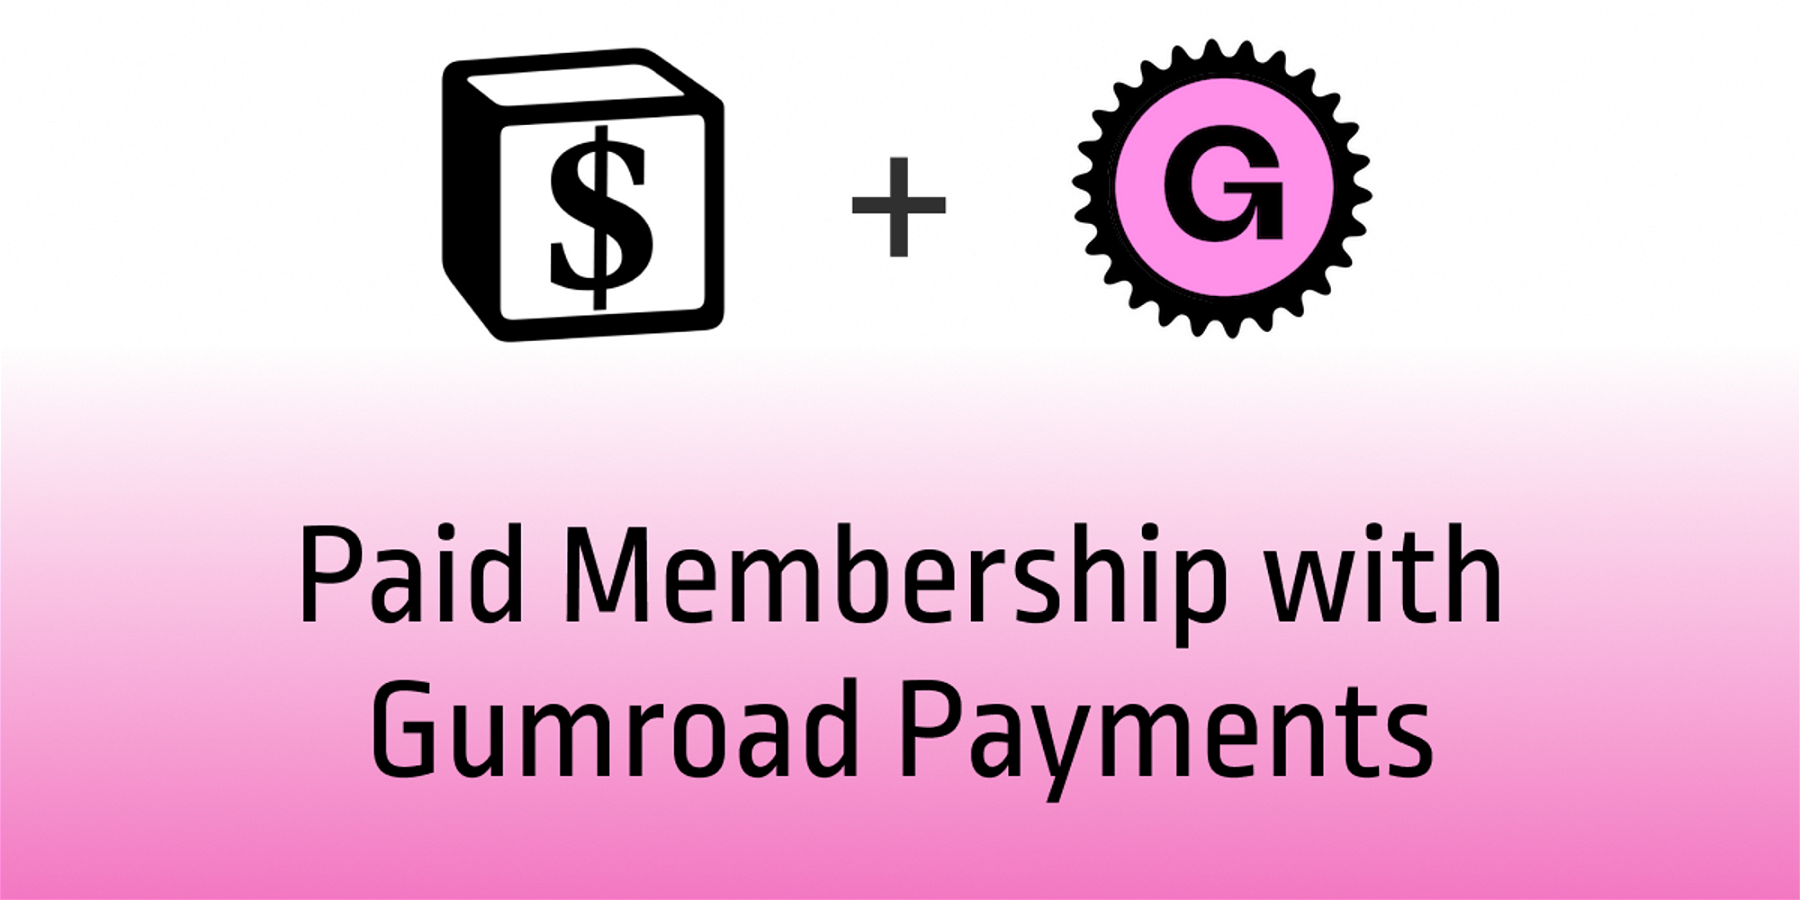 How to configure Gumroad Payments on Sotion